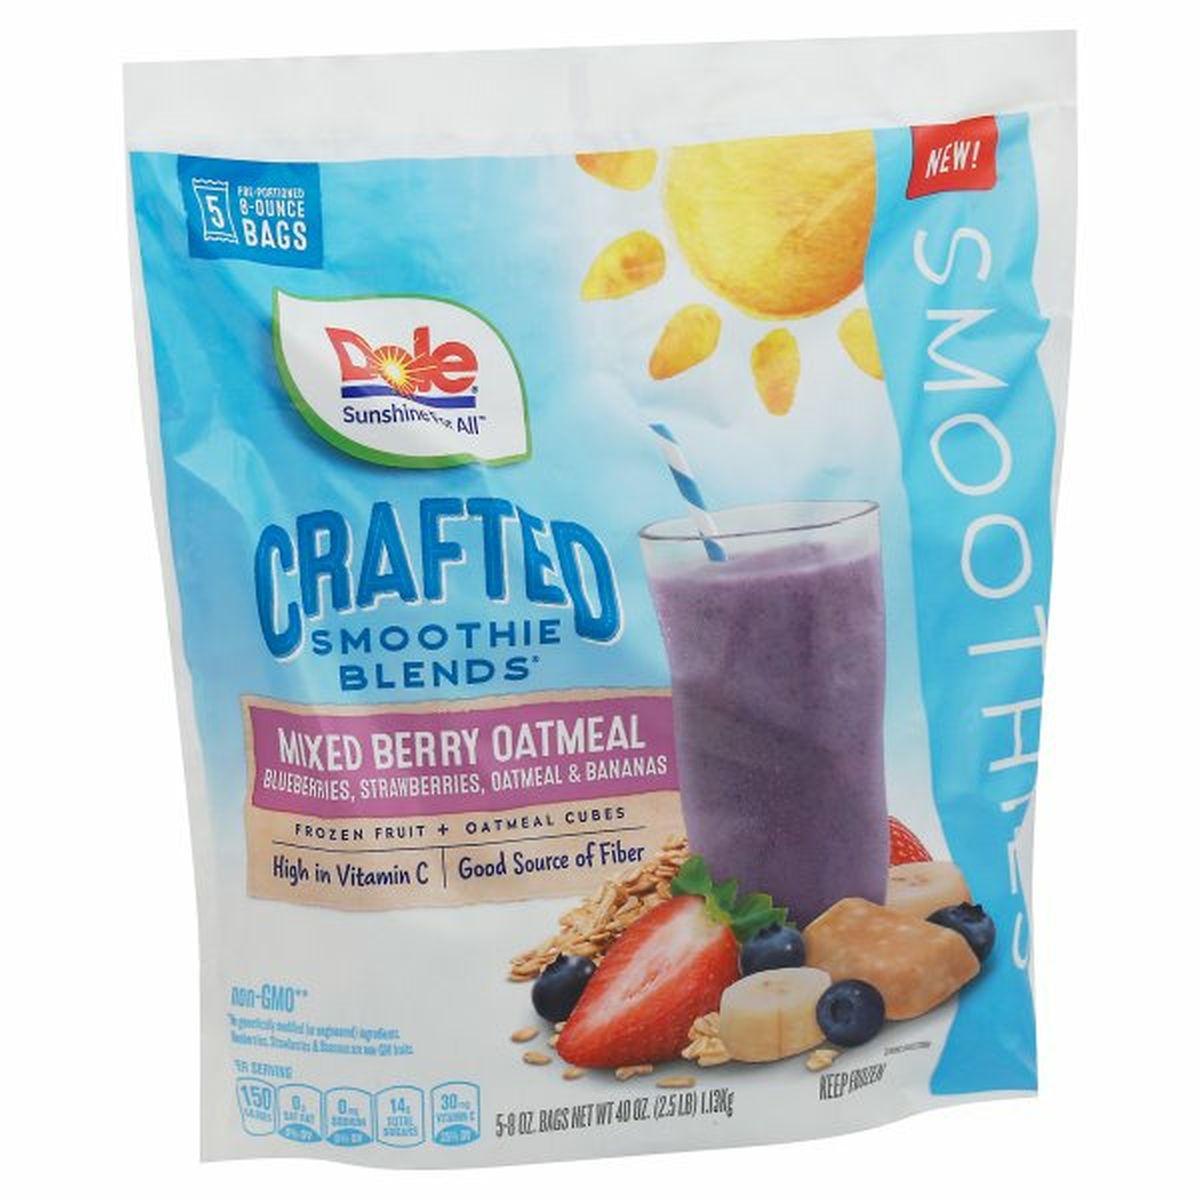 Calories in Dole Crafted Smoothie Blends, Mixed Berry Oatmeal